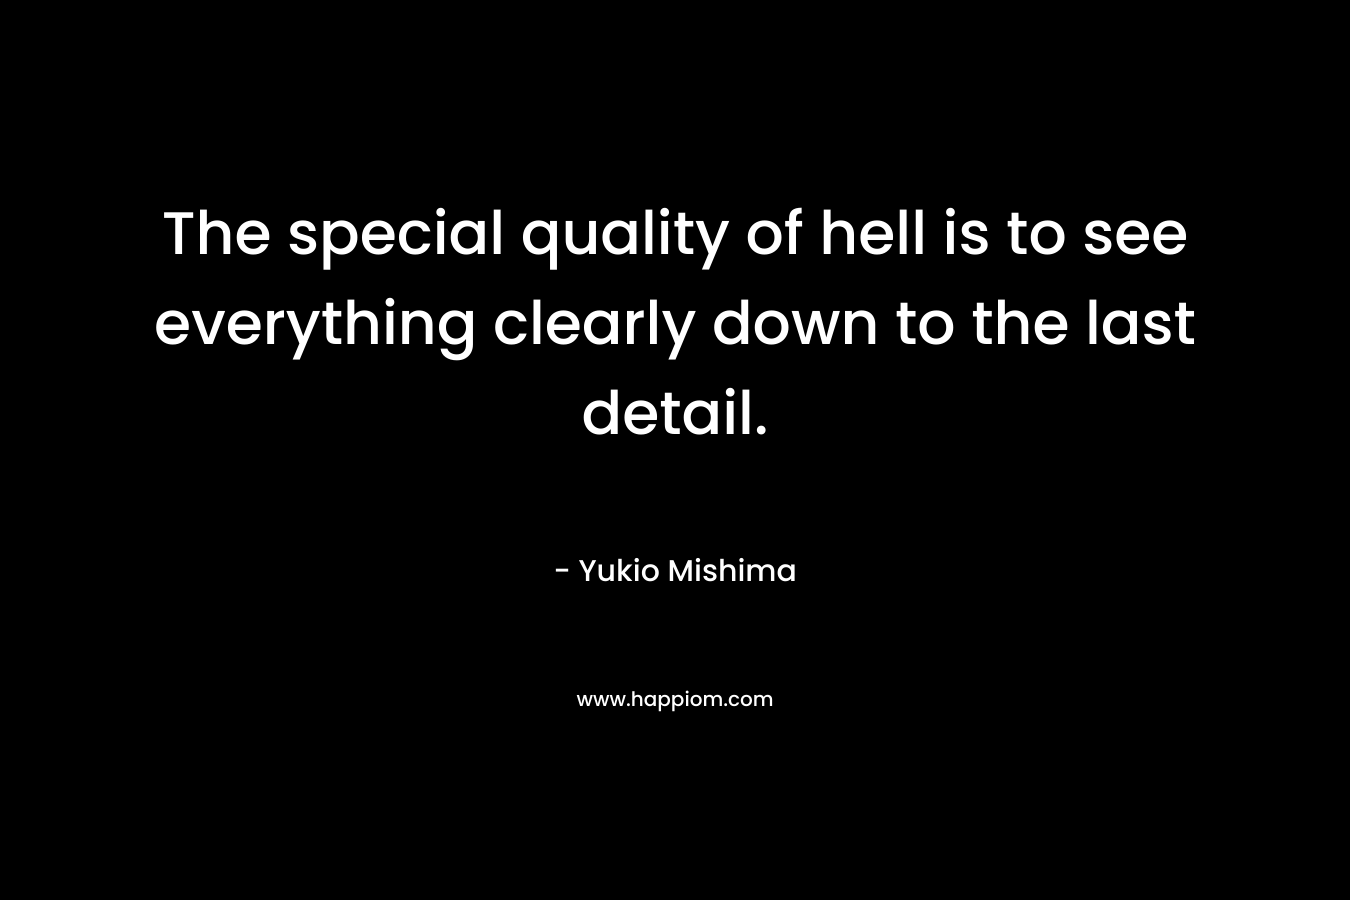 The special quality of hell is to see everything clearly down to the last detail. – Yukio Mishima